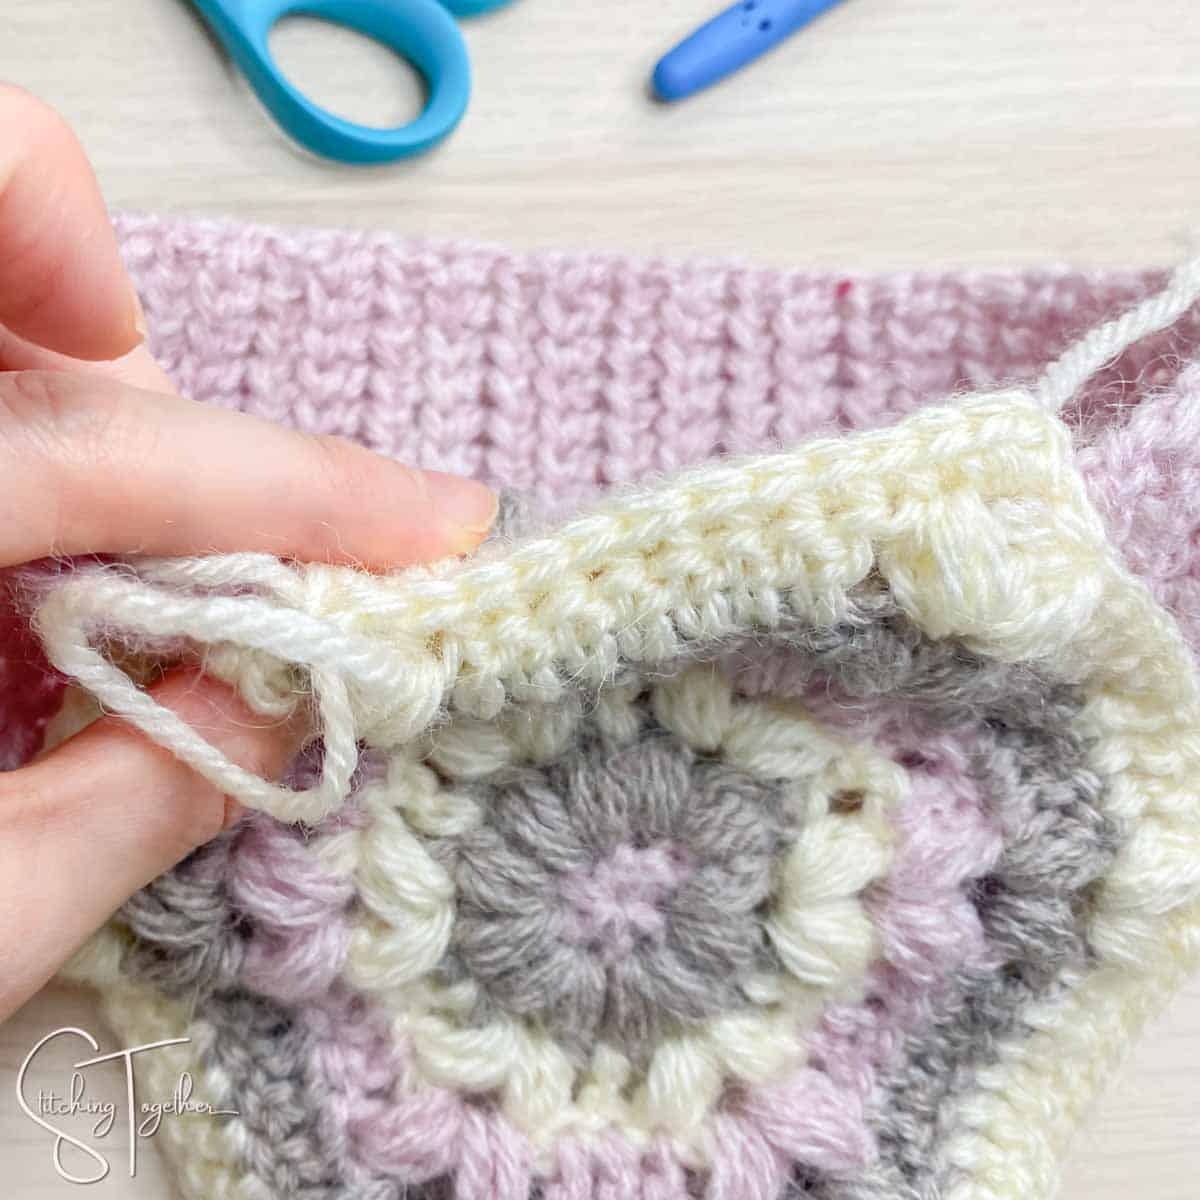 showing the single crochet row that secured the ear flaps to the headband